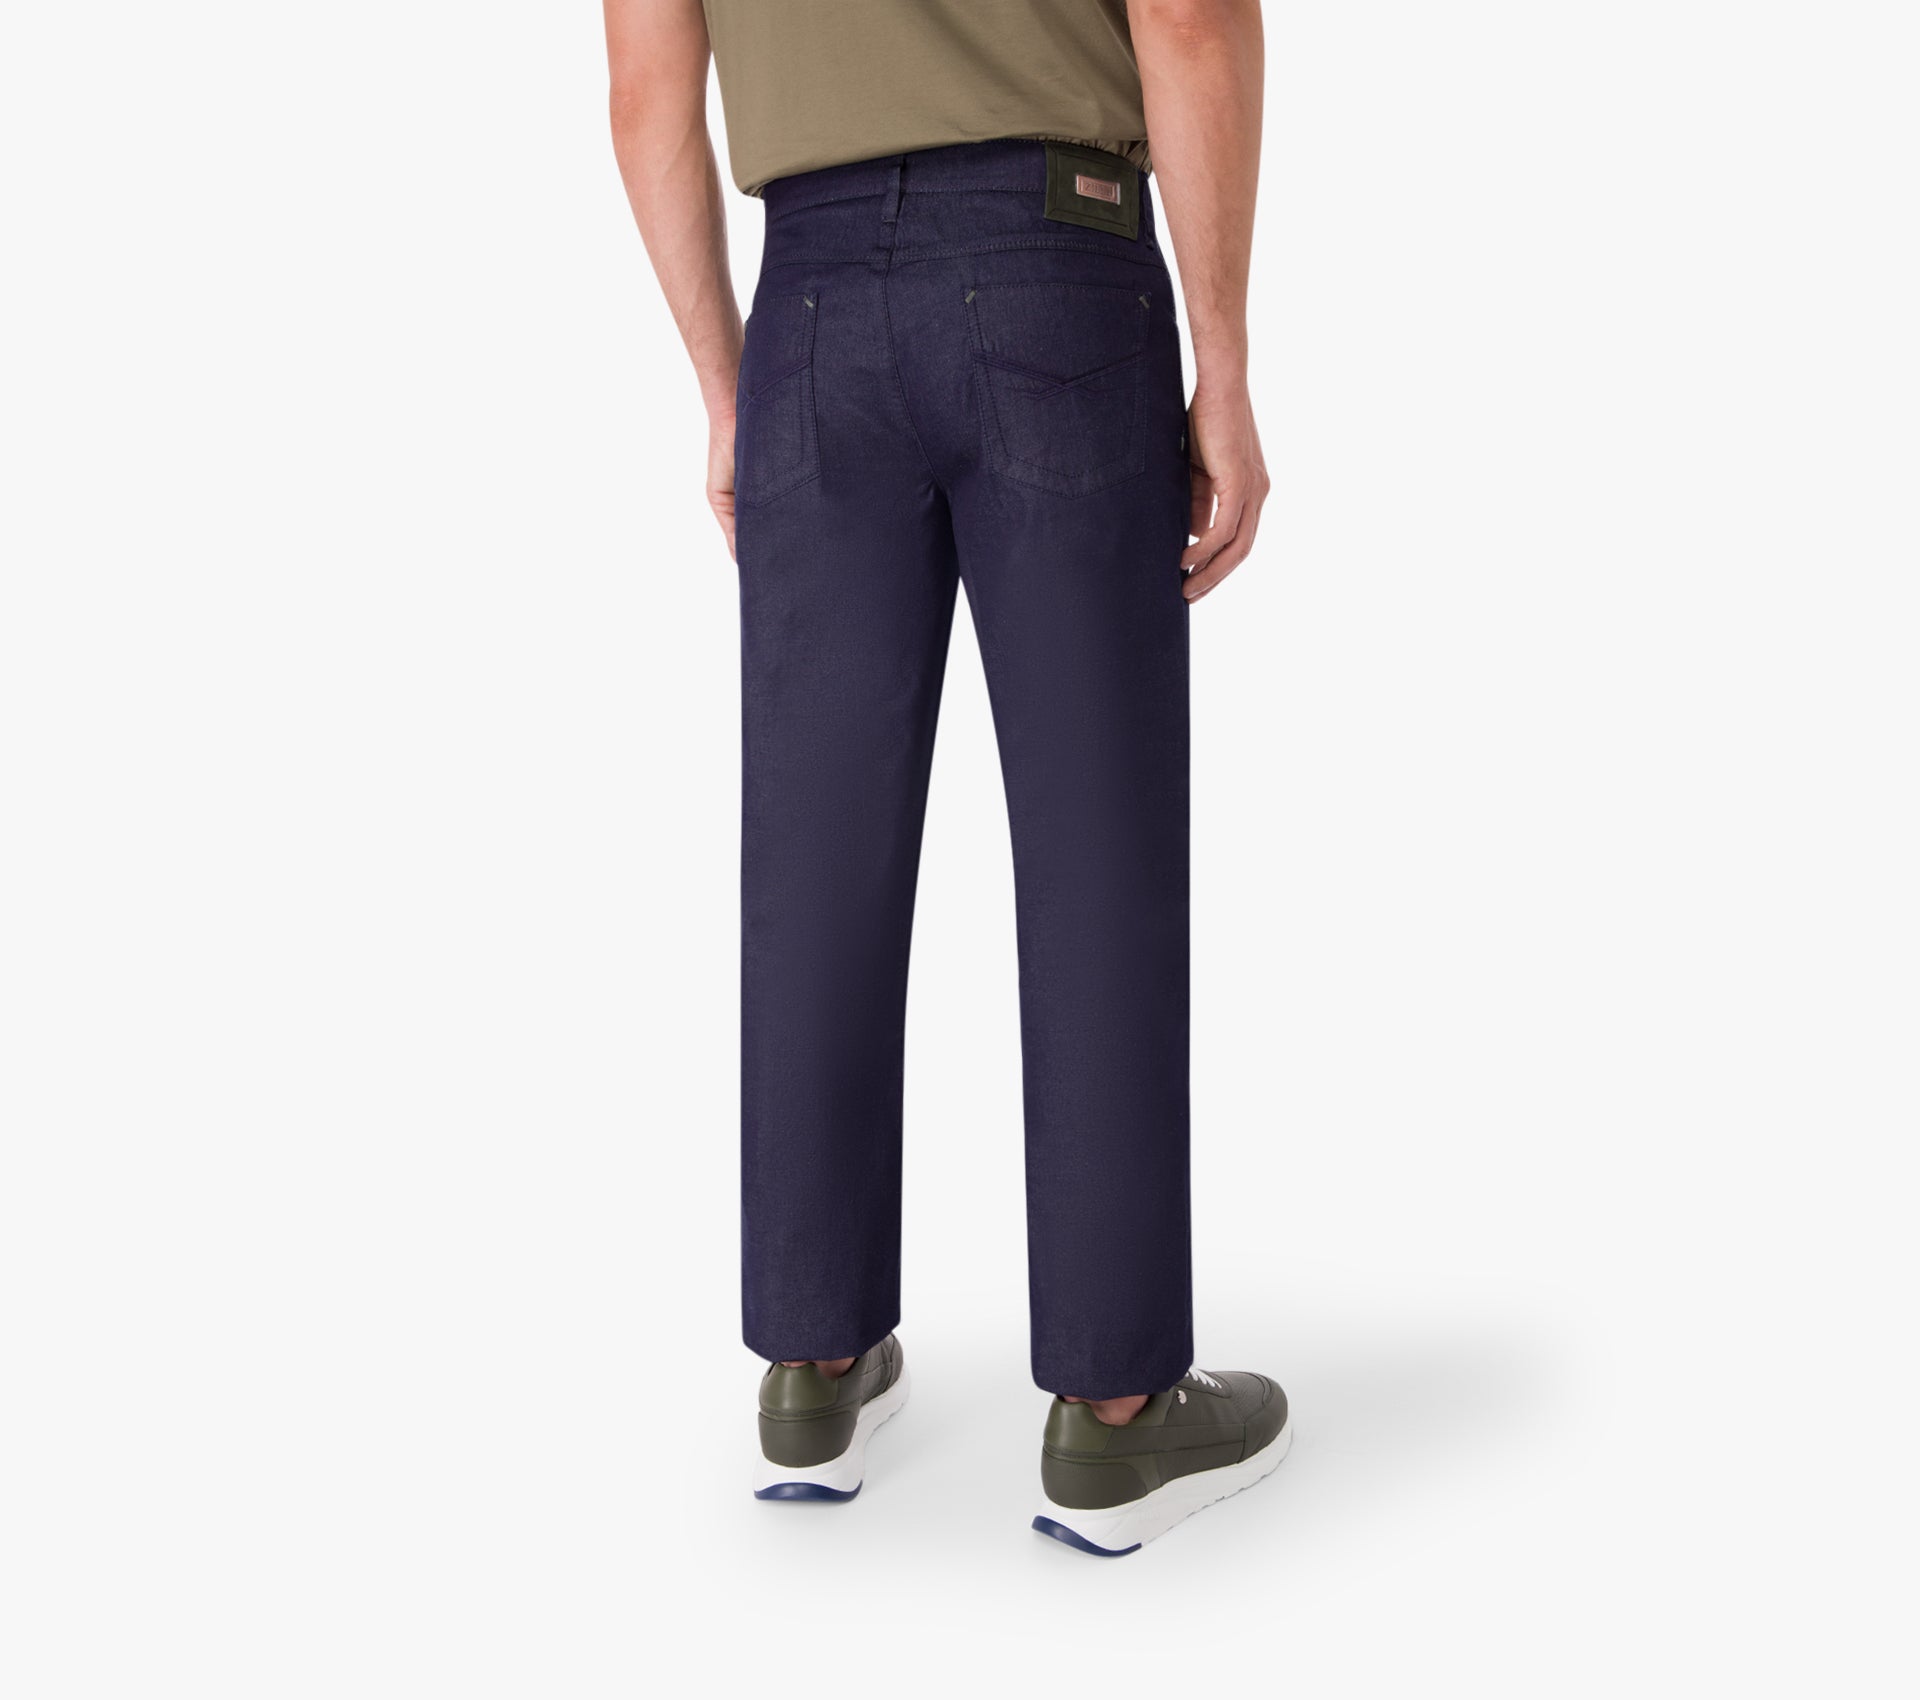 Slim Fit Cotton and Silk Jeans